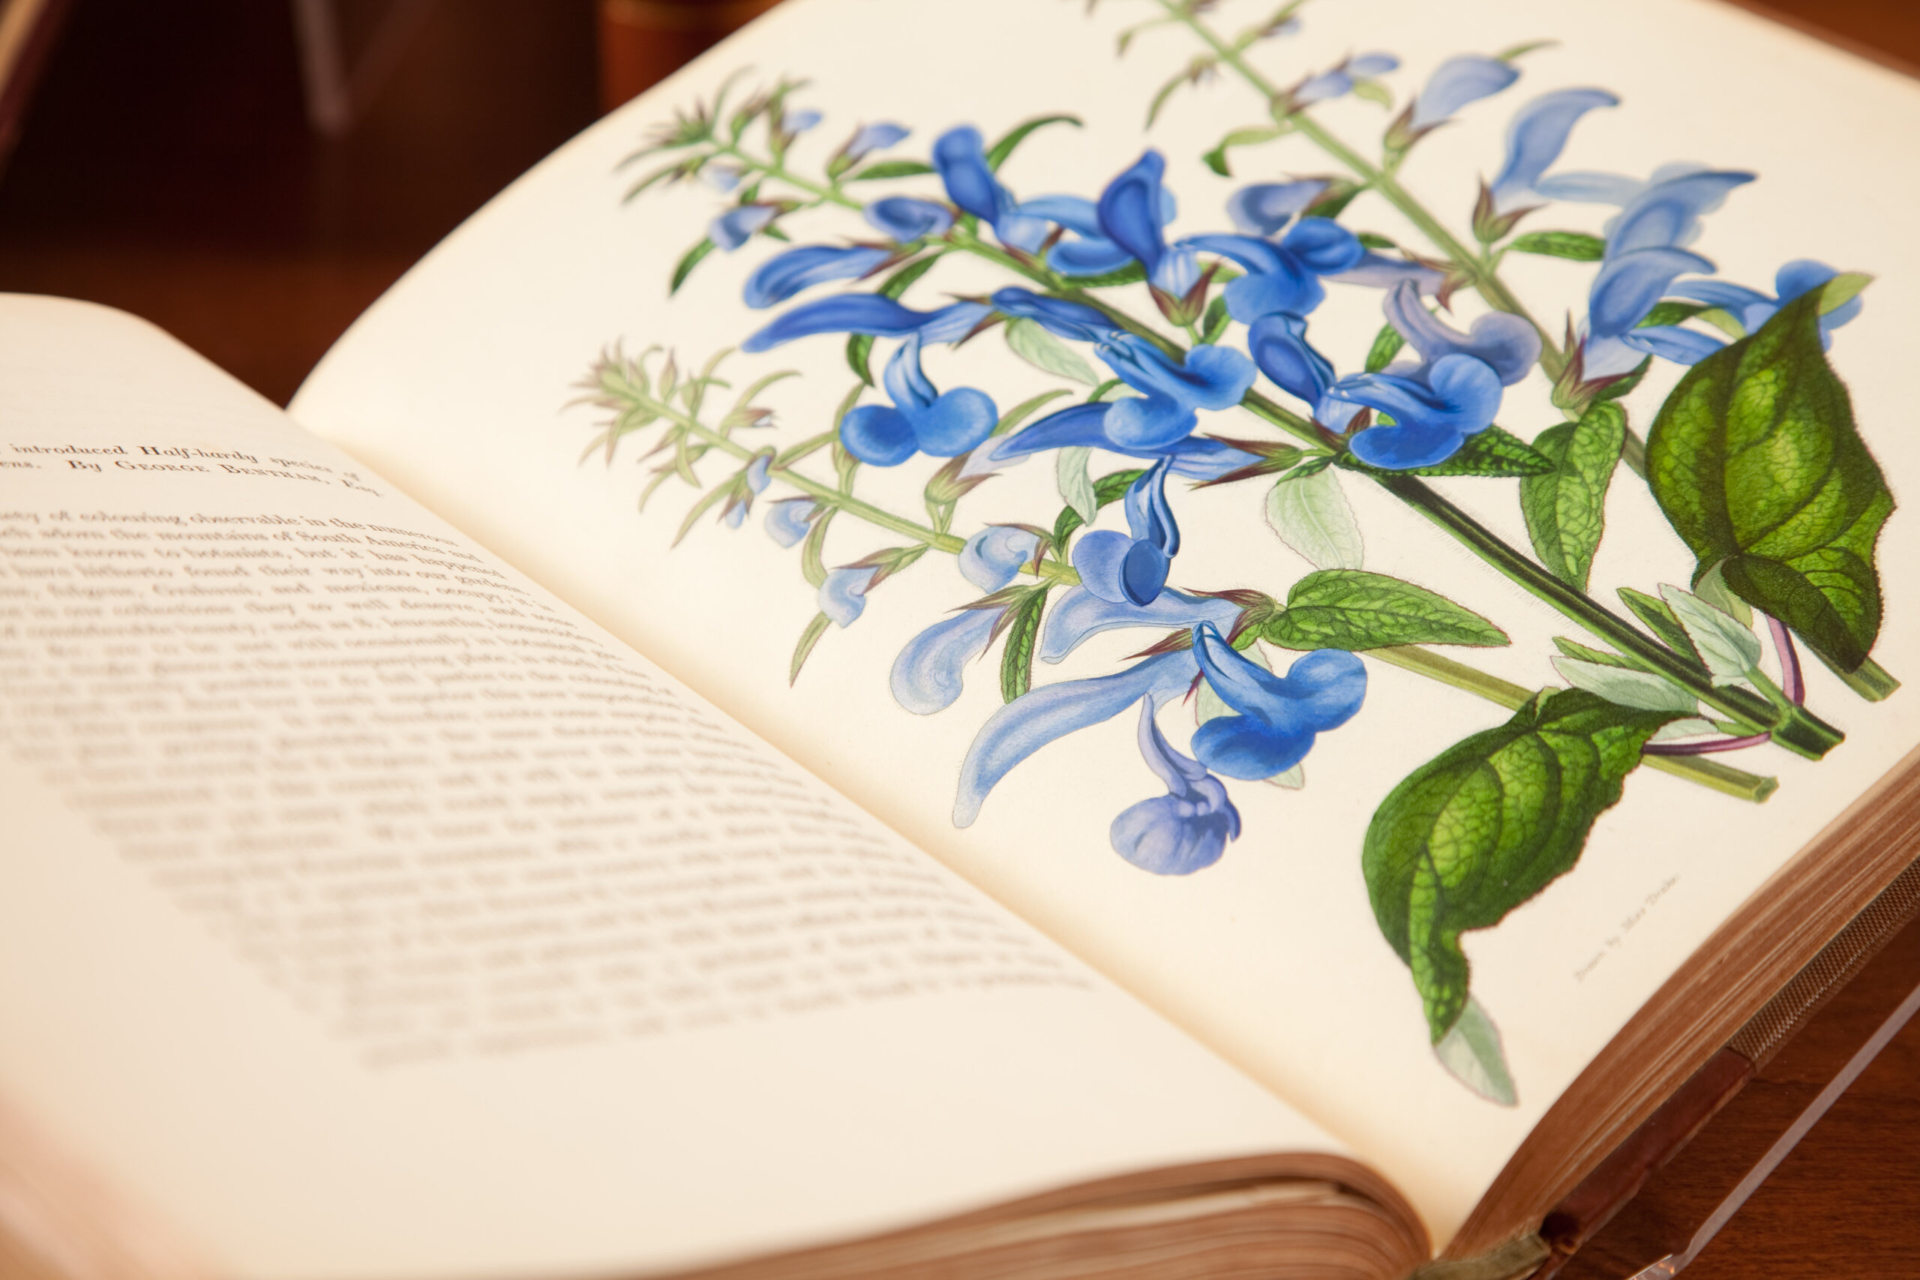 A botanical art print in a book, part of the Sterling Morton Library's collections.